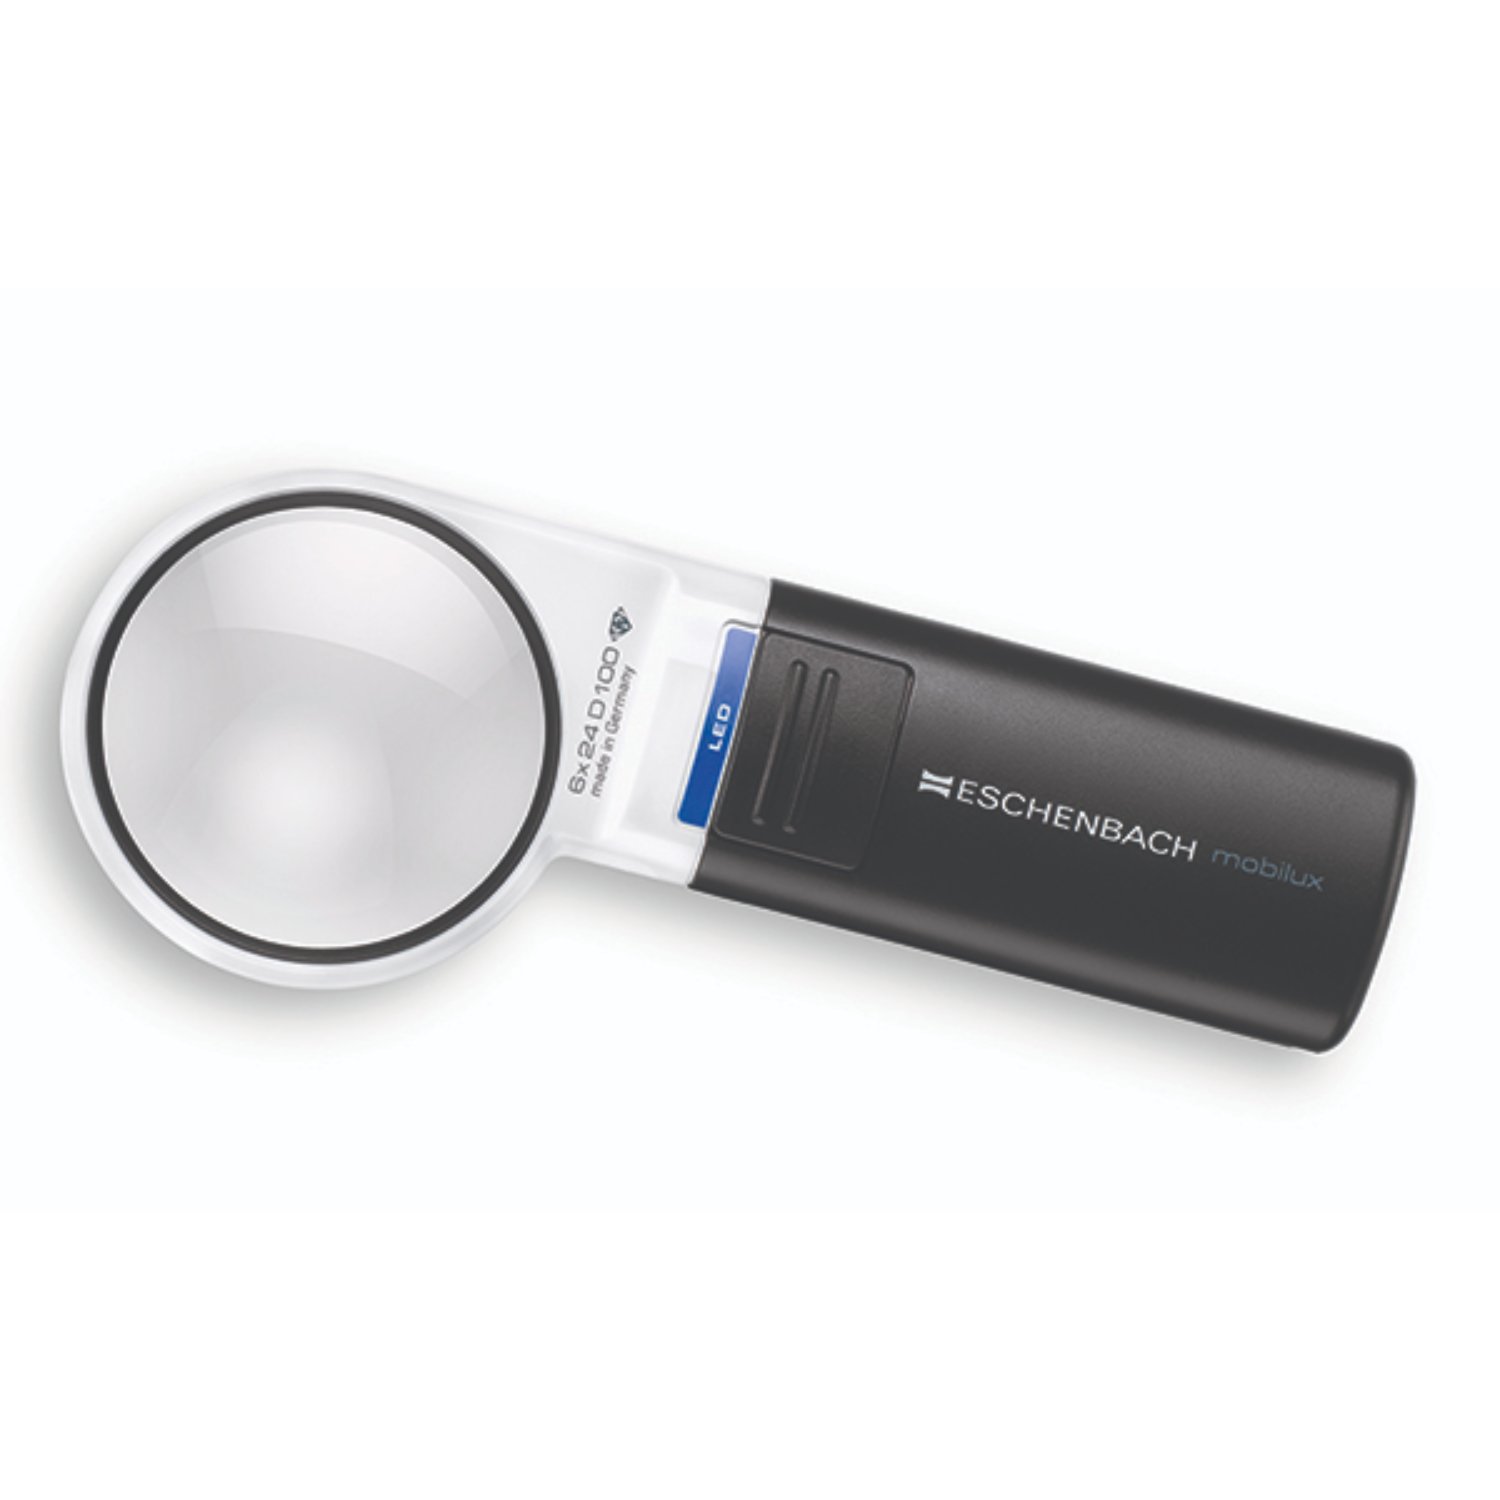 Image of the 6x Mobilux® round LED handheld magnifier from Eschenbach Optik .